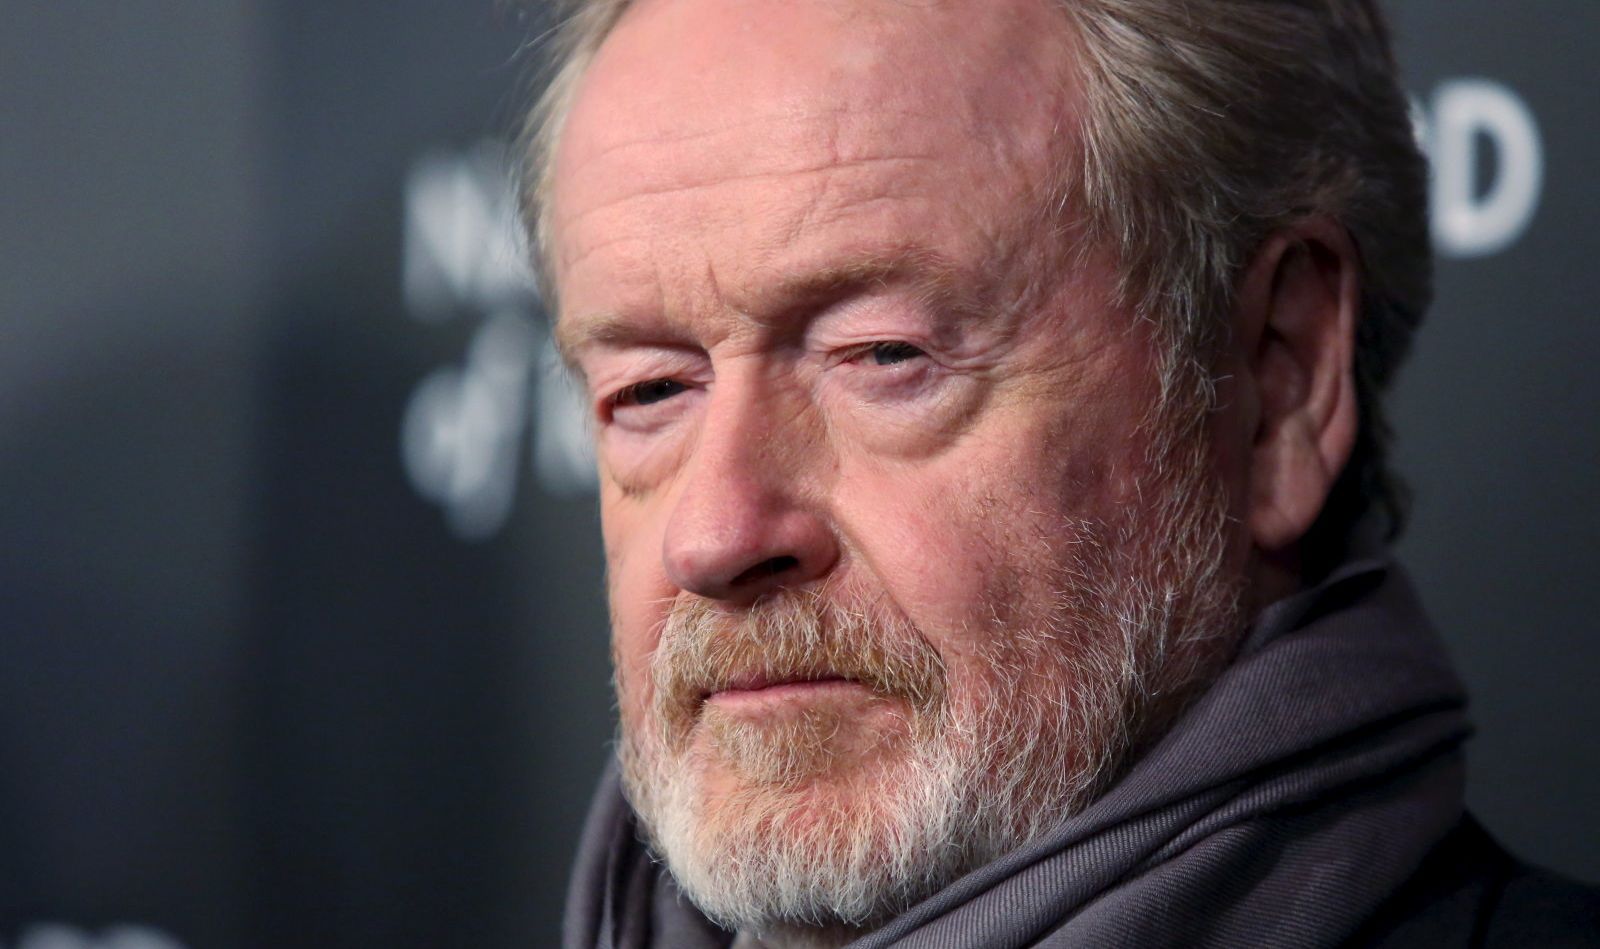 Director Ridley Scott is seriously interested in VR technologies